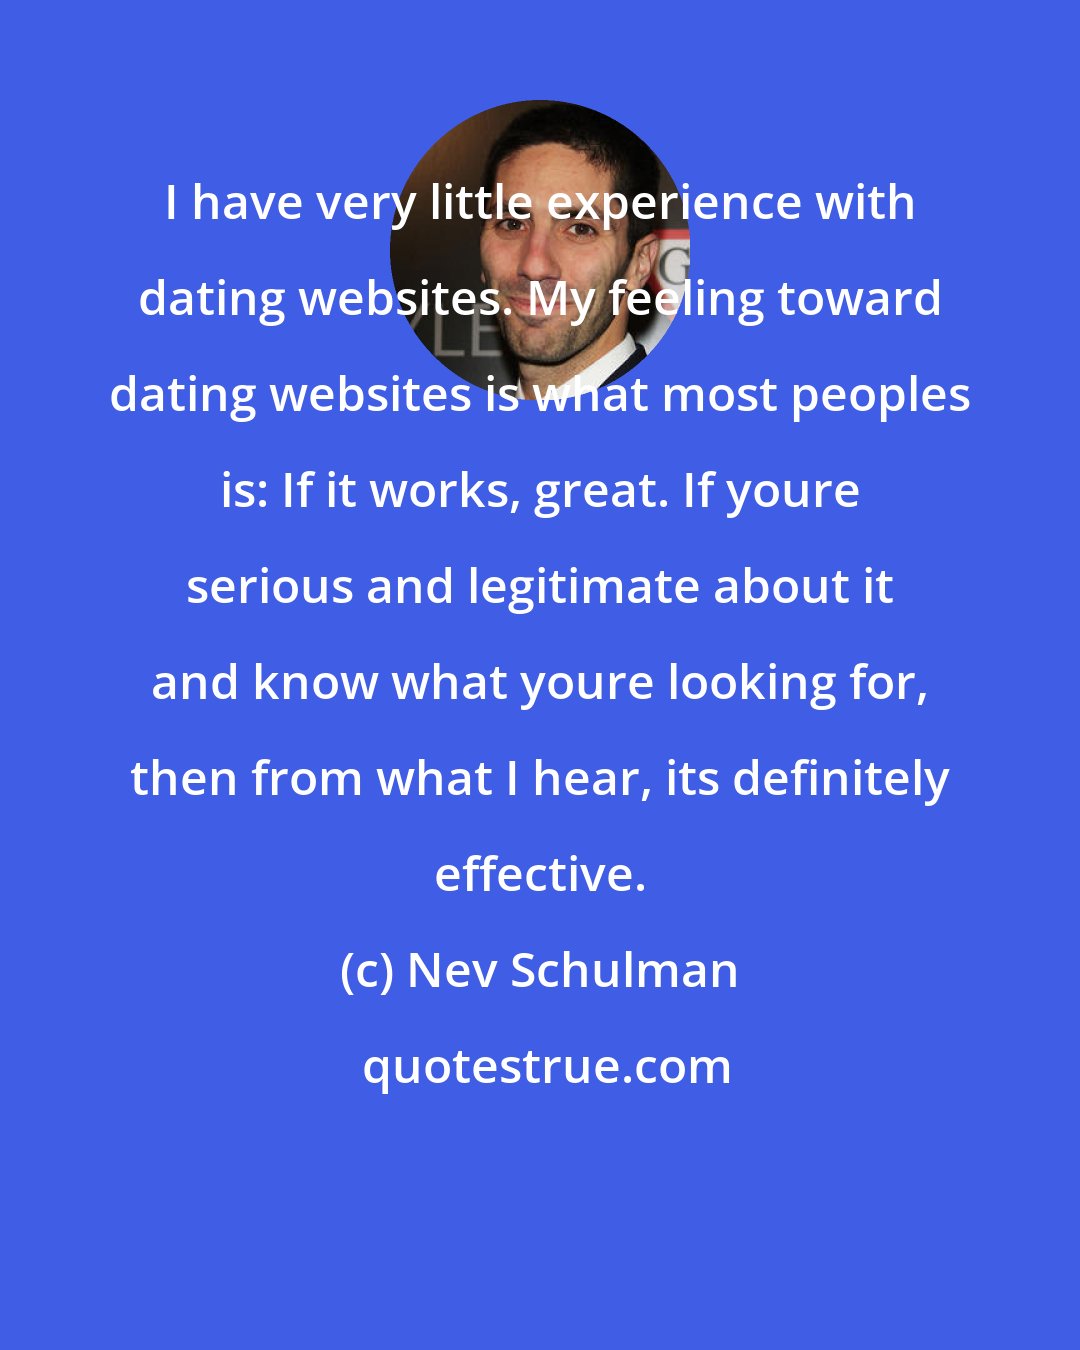 Nev Schulman: I have very little experience with dating websites. My feeling toward dating websites is what most peoples is: If it works, great. If youre serious and legitimate about it and know what youre looking for, then from what I hear, its definitely effective.